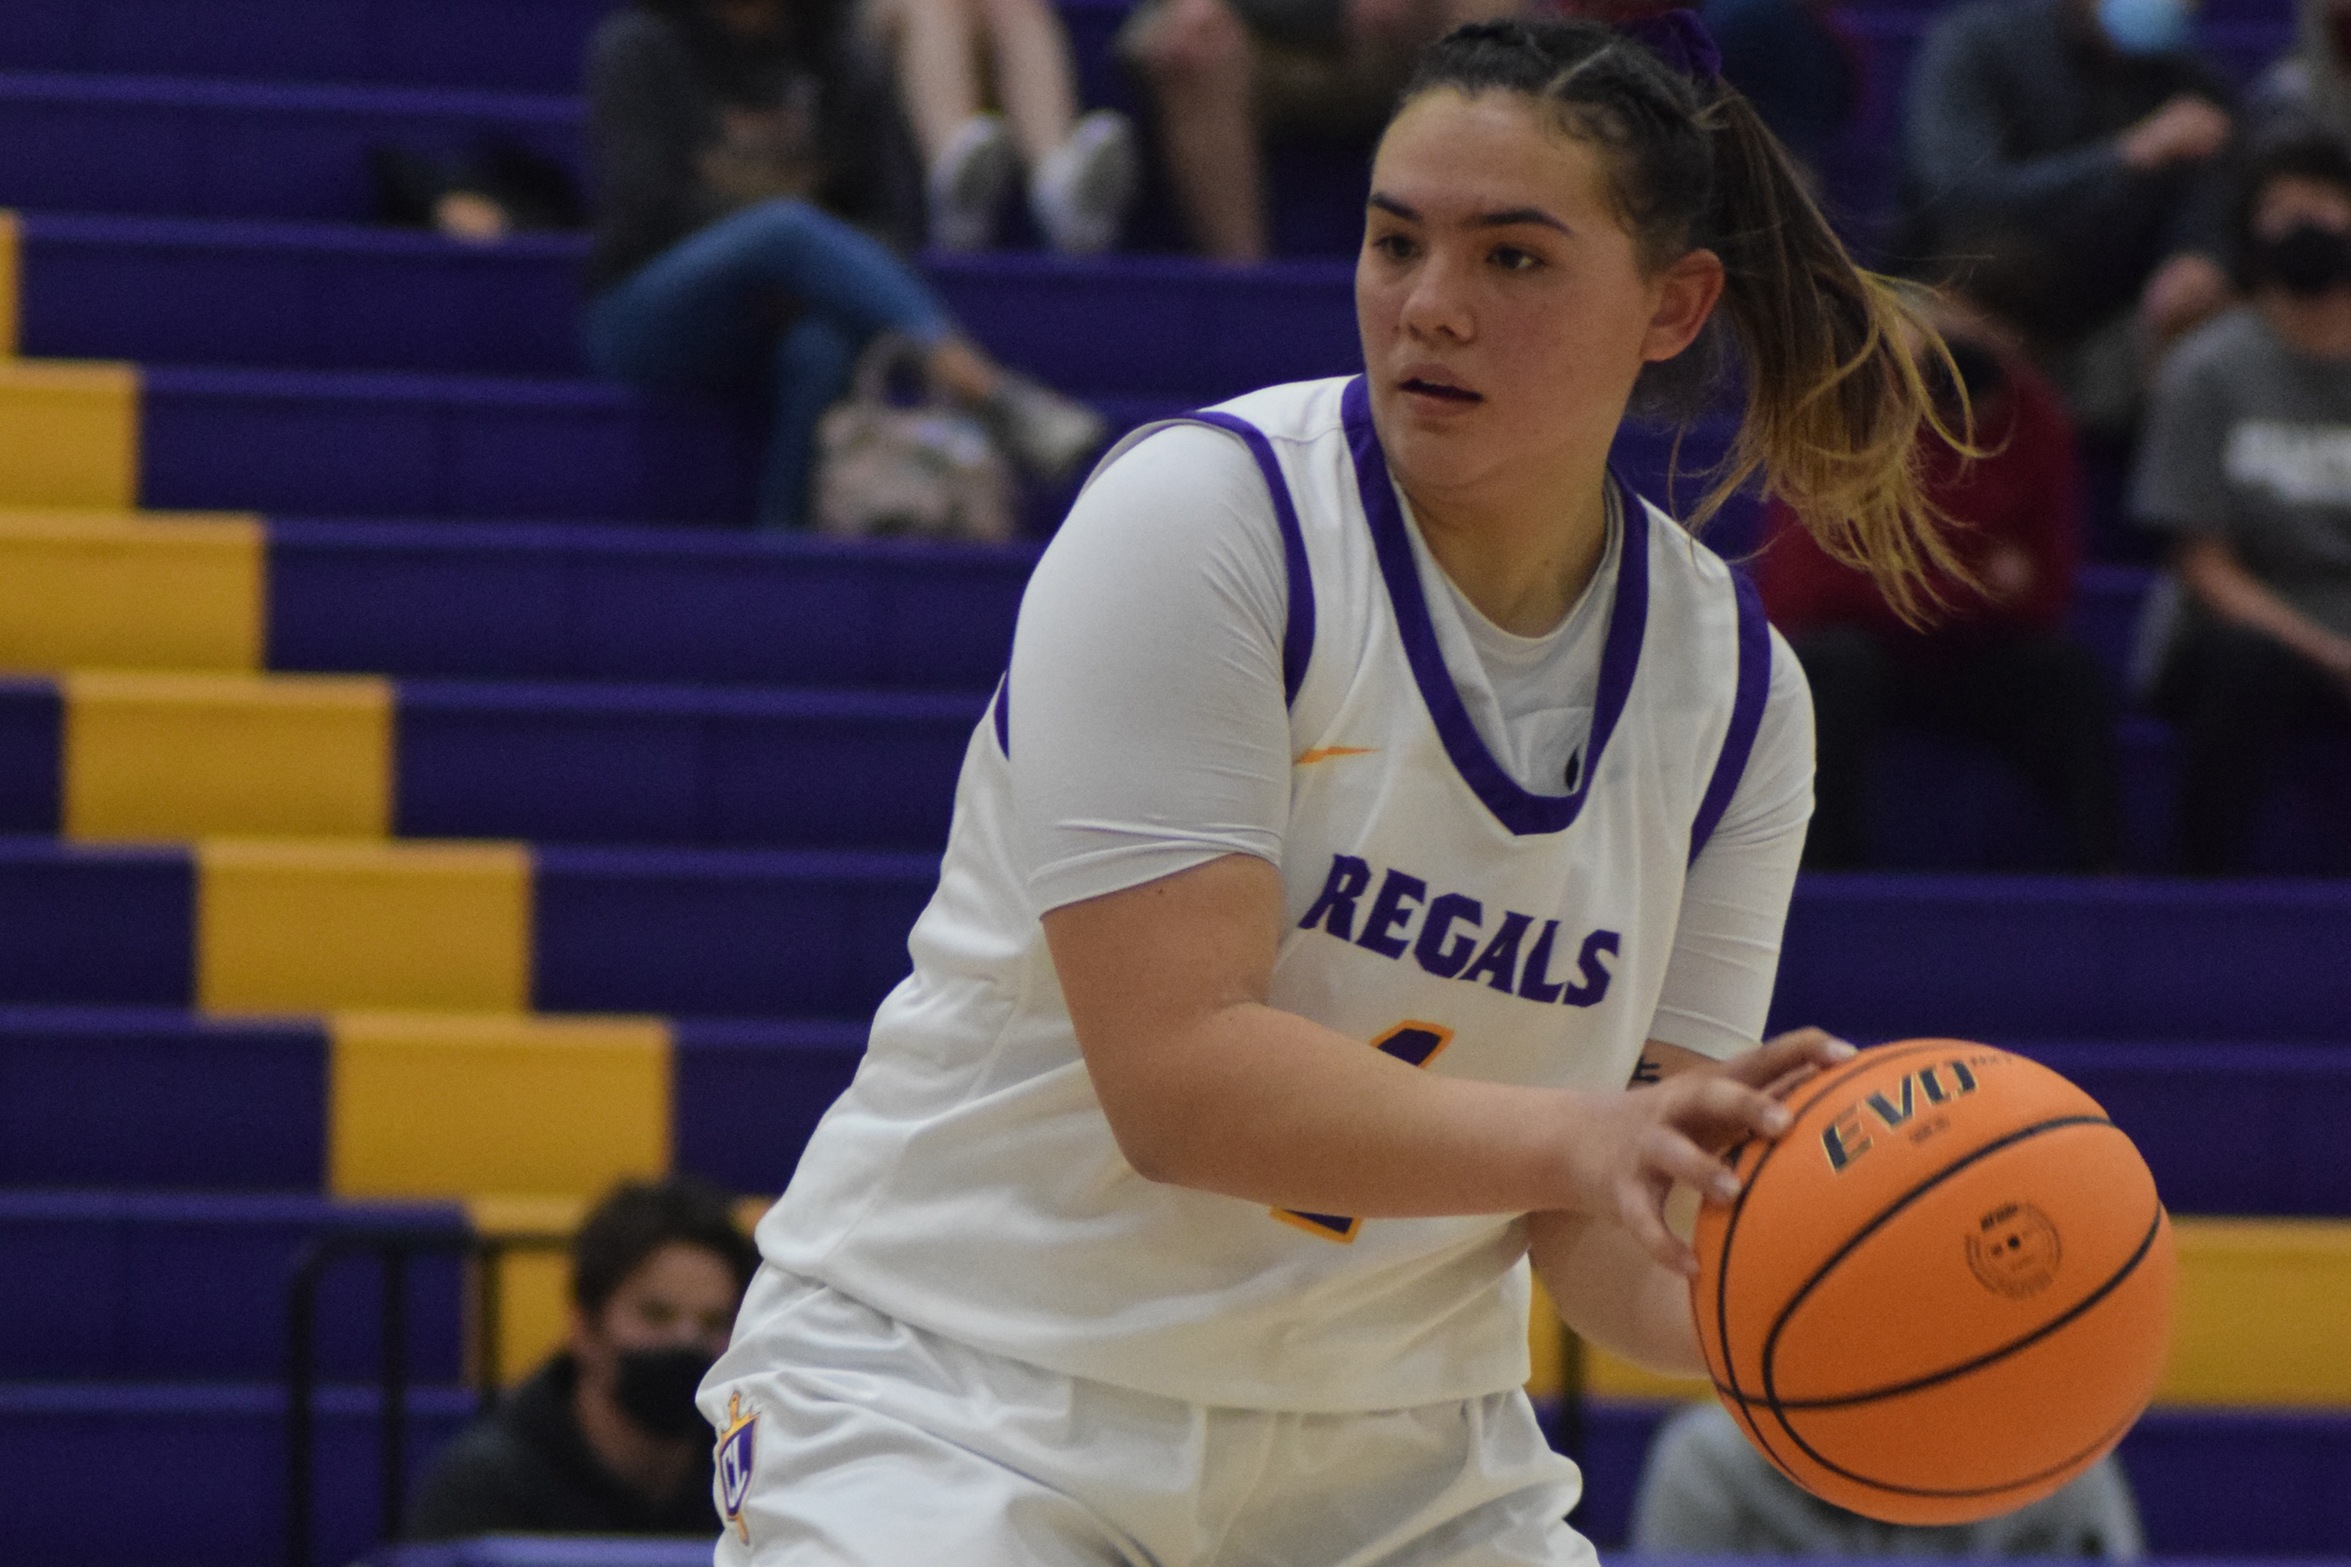 Eagles Edge Out Regals By Three Points